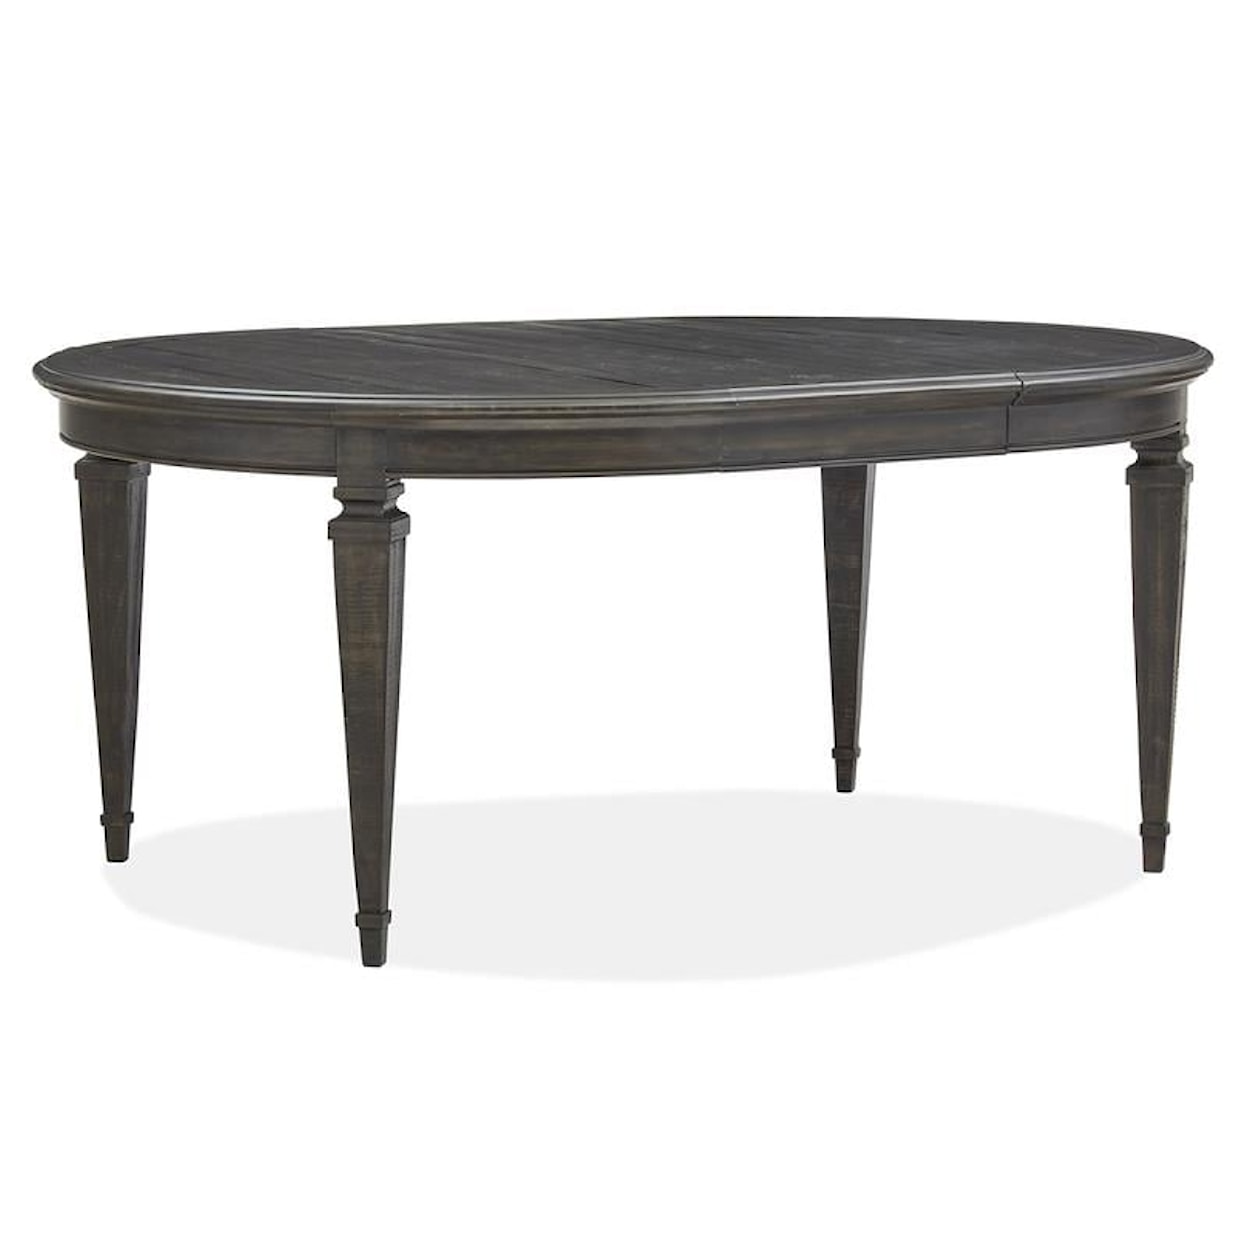 Magnussen Home Calistoga Dining Round Dining Table